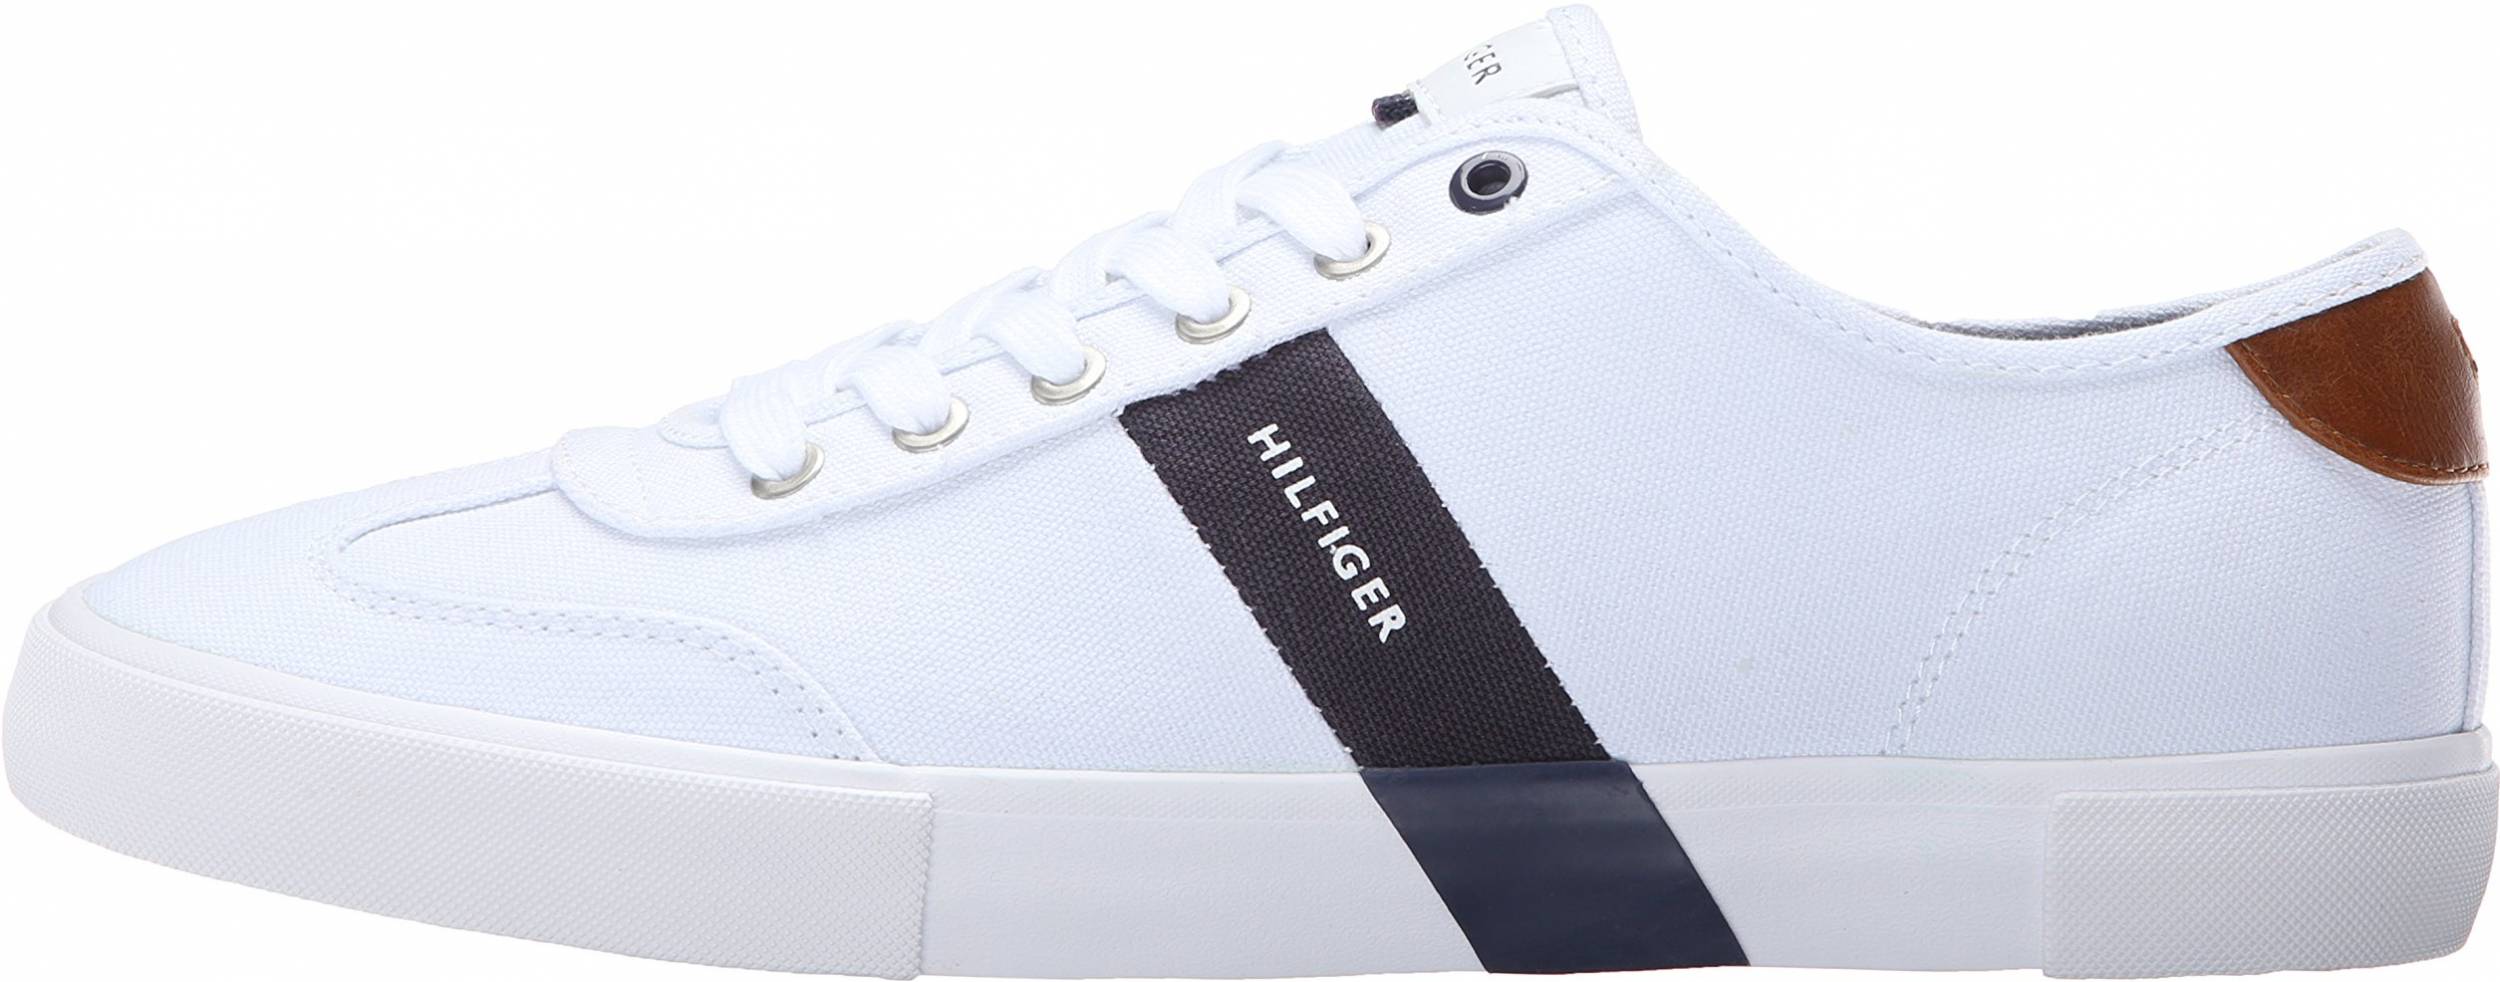 tommy hilfiger sneakers mens white